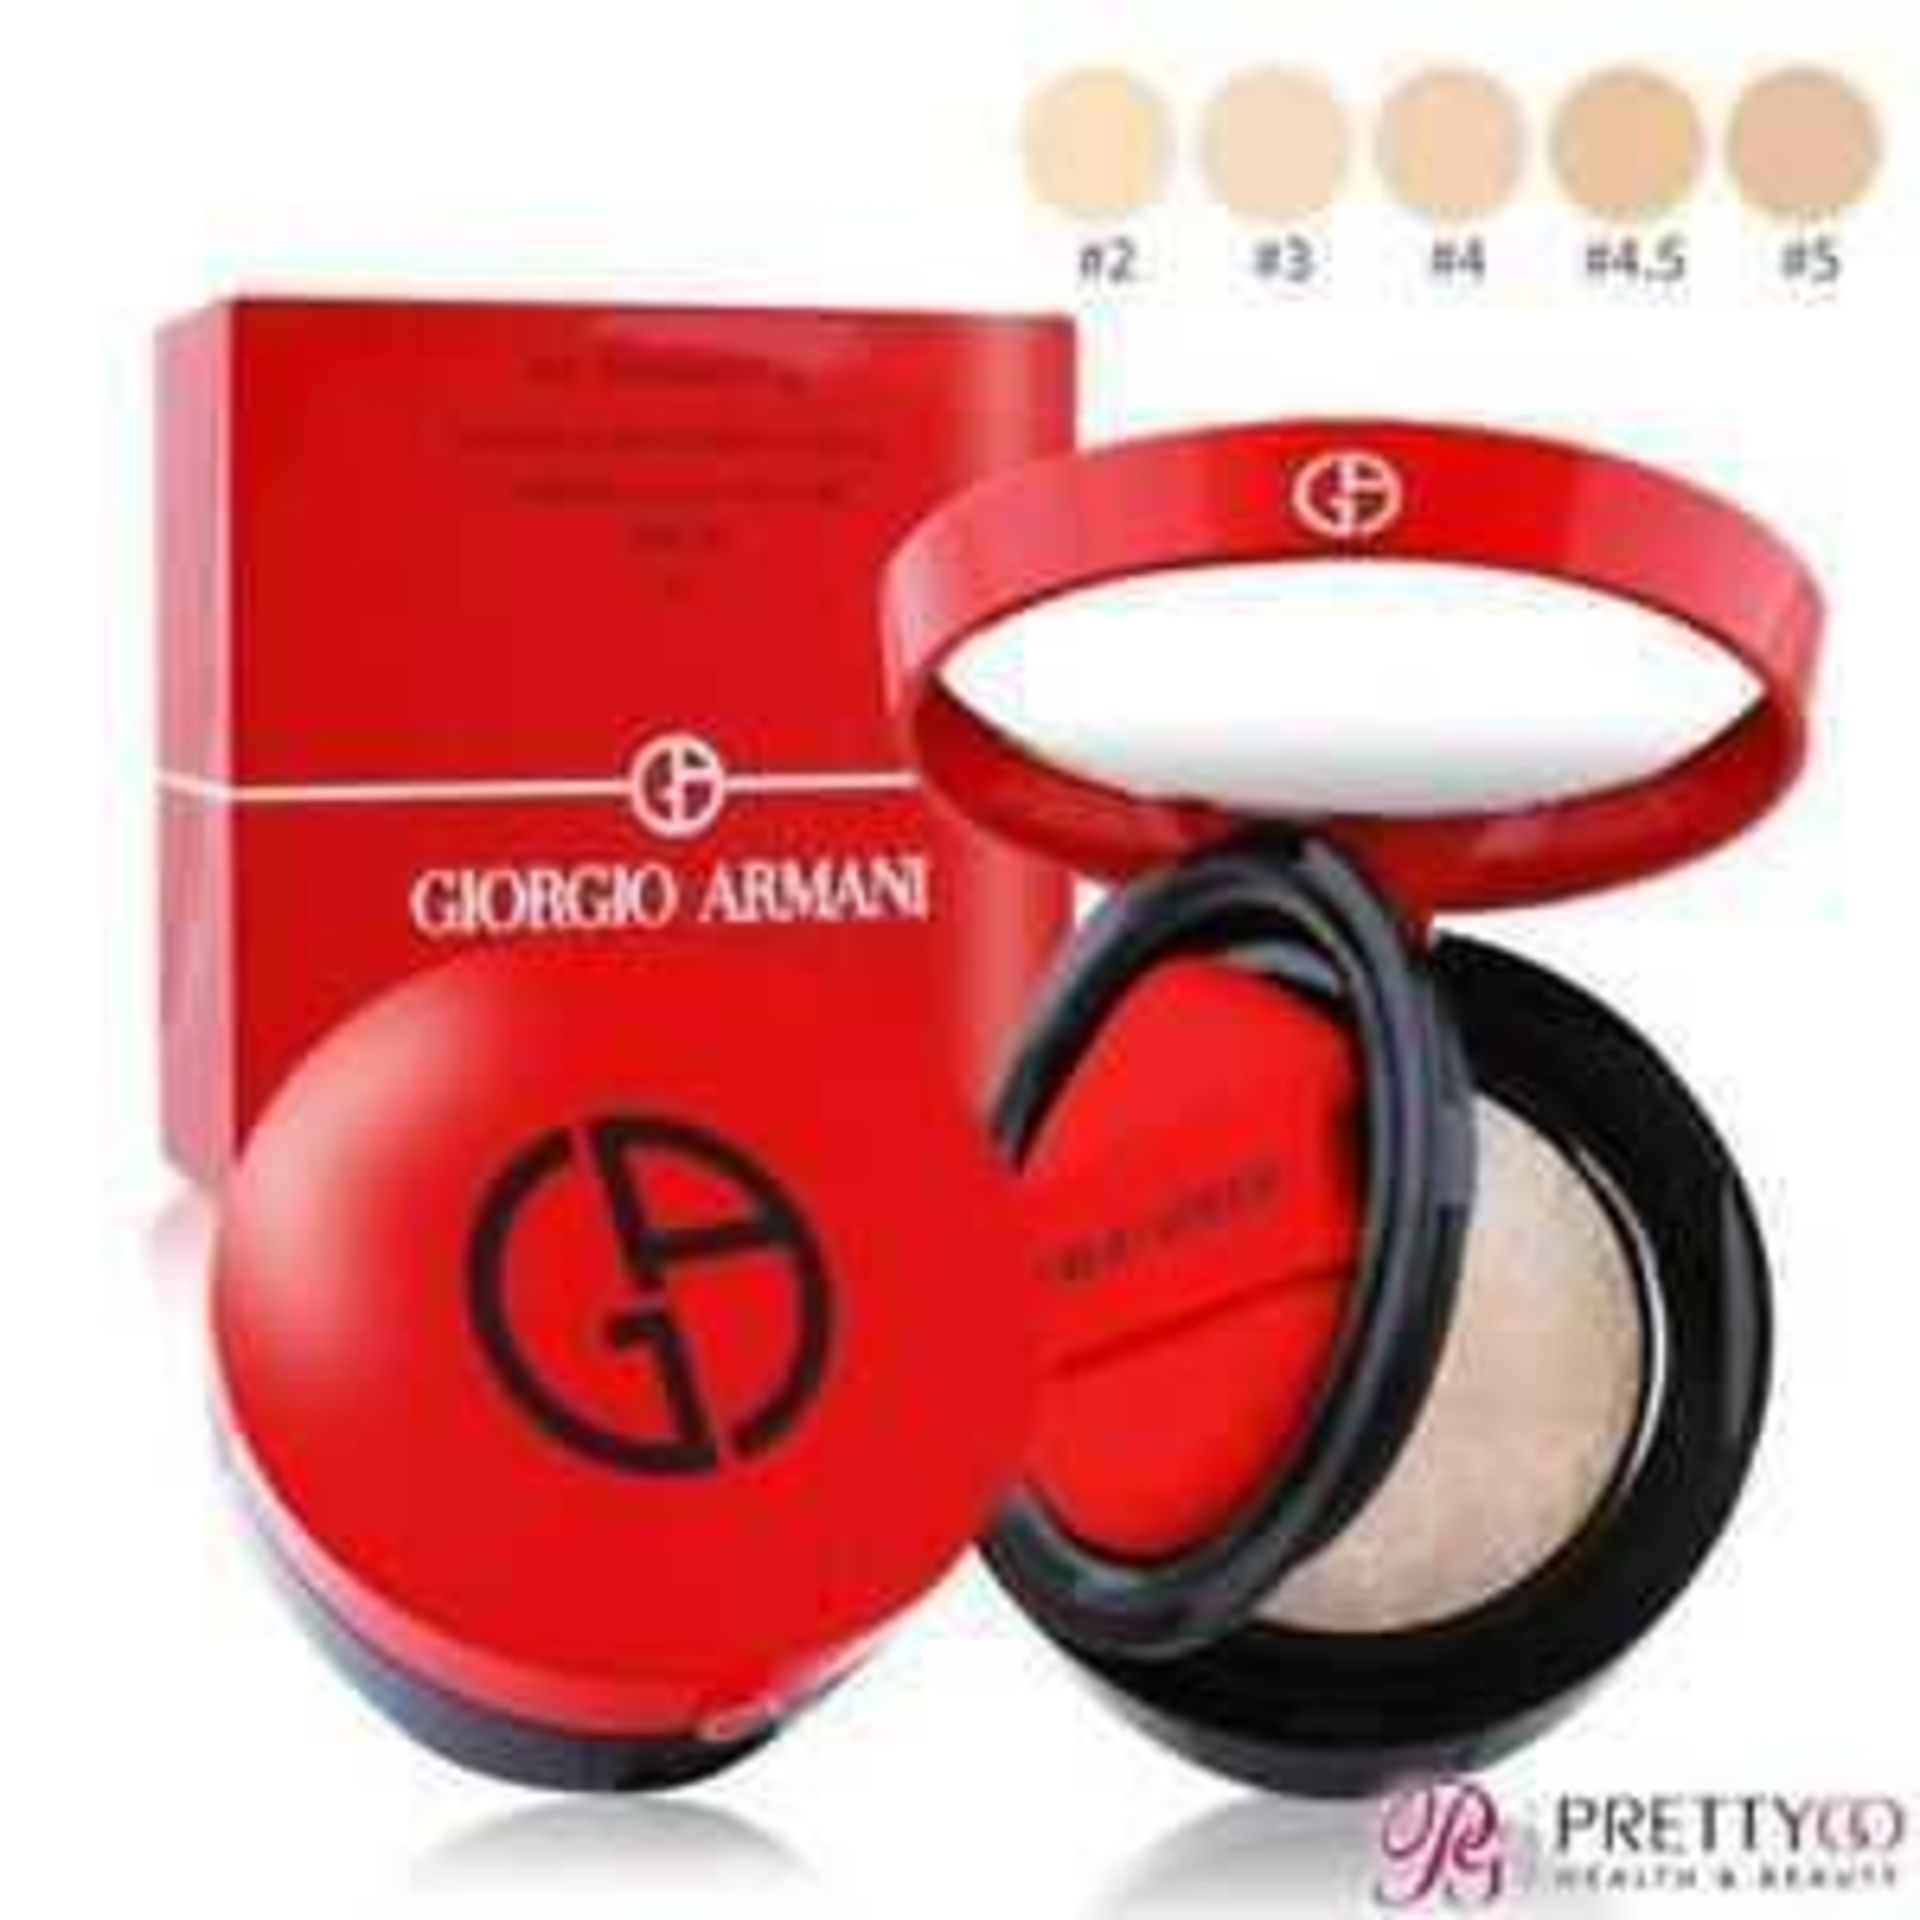 Rrp £200 Lot To Contain 3 Boxed Giorgio Armani Essence-In-Foundation With Touch Up Cushion Spf23